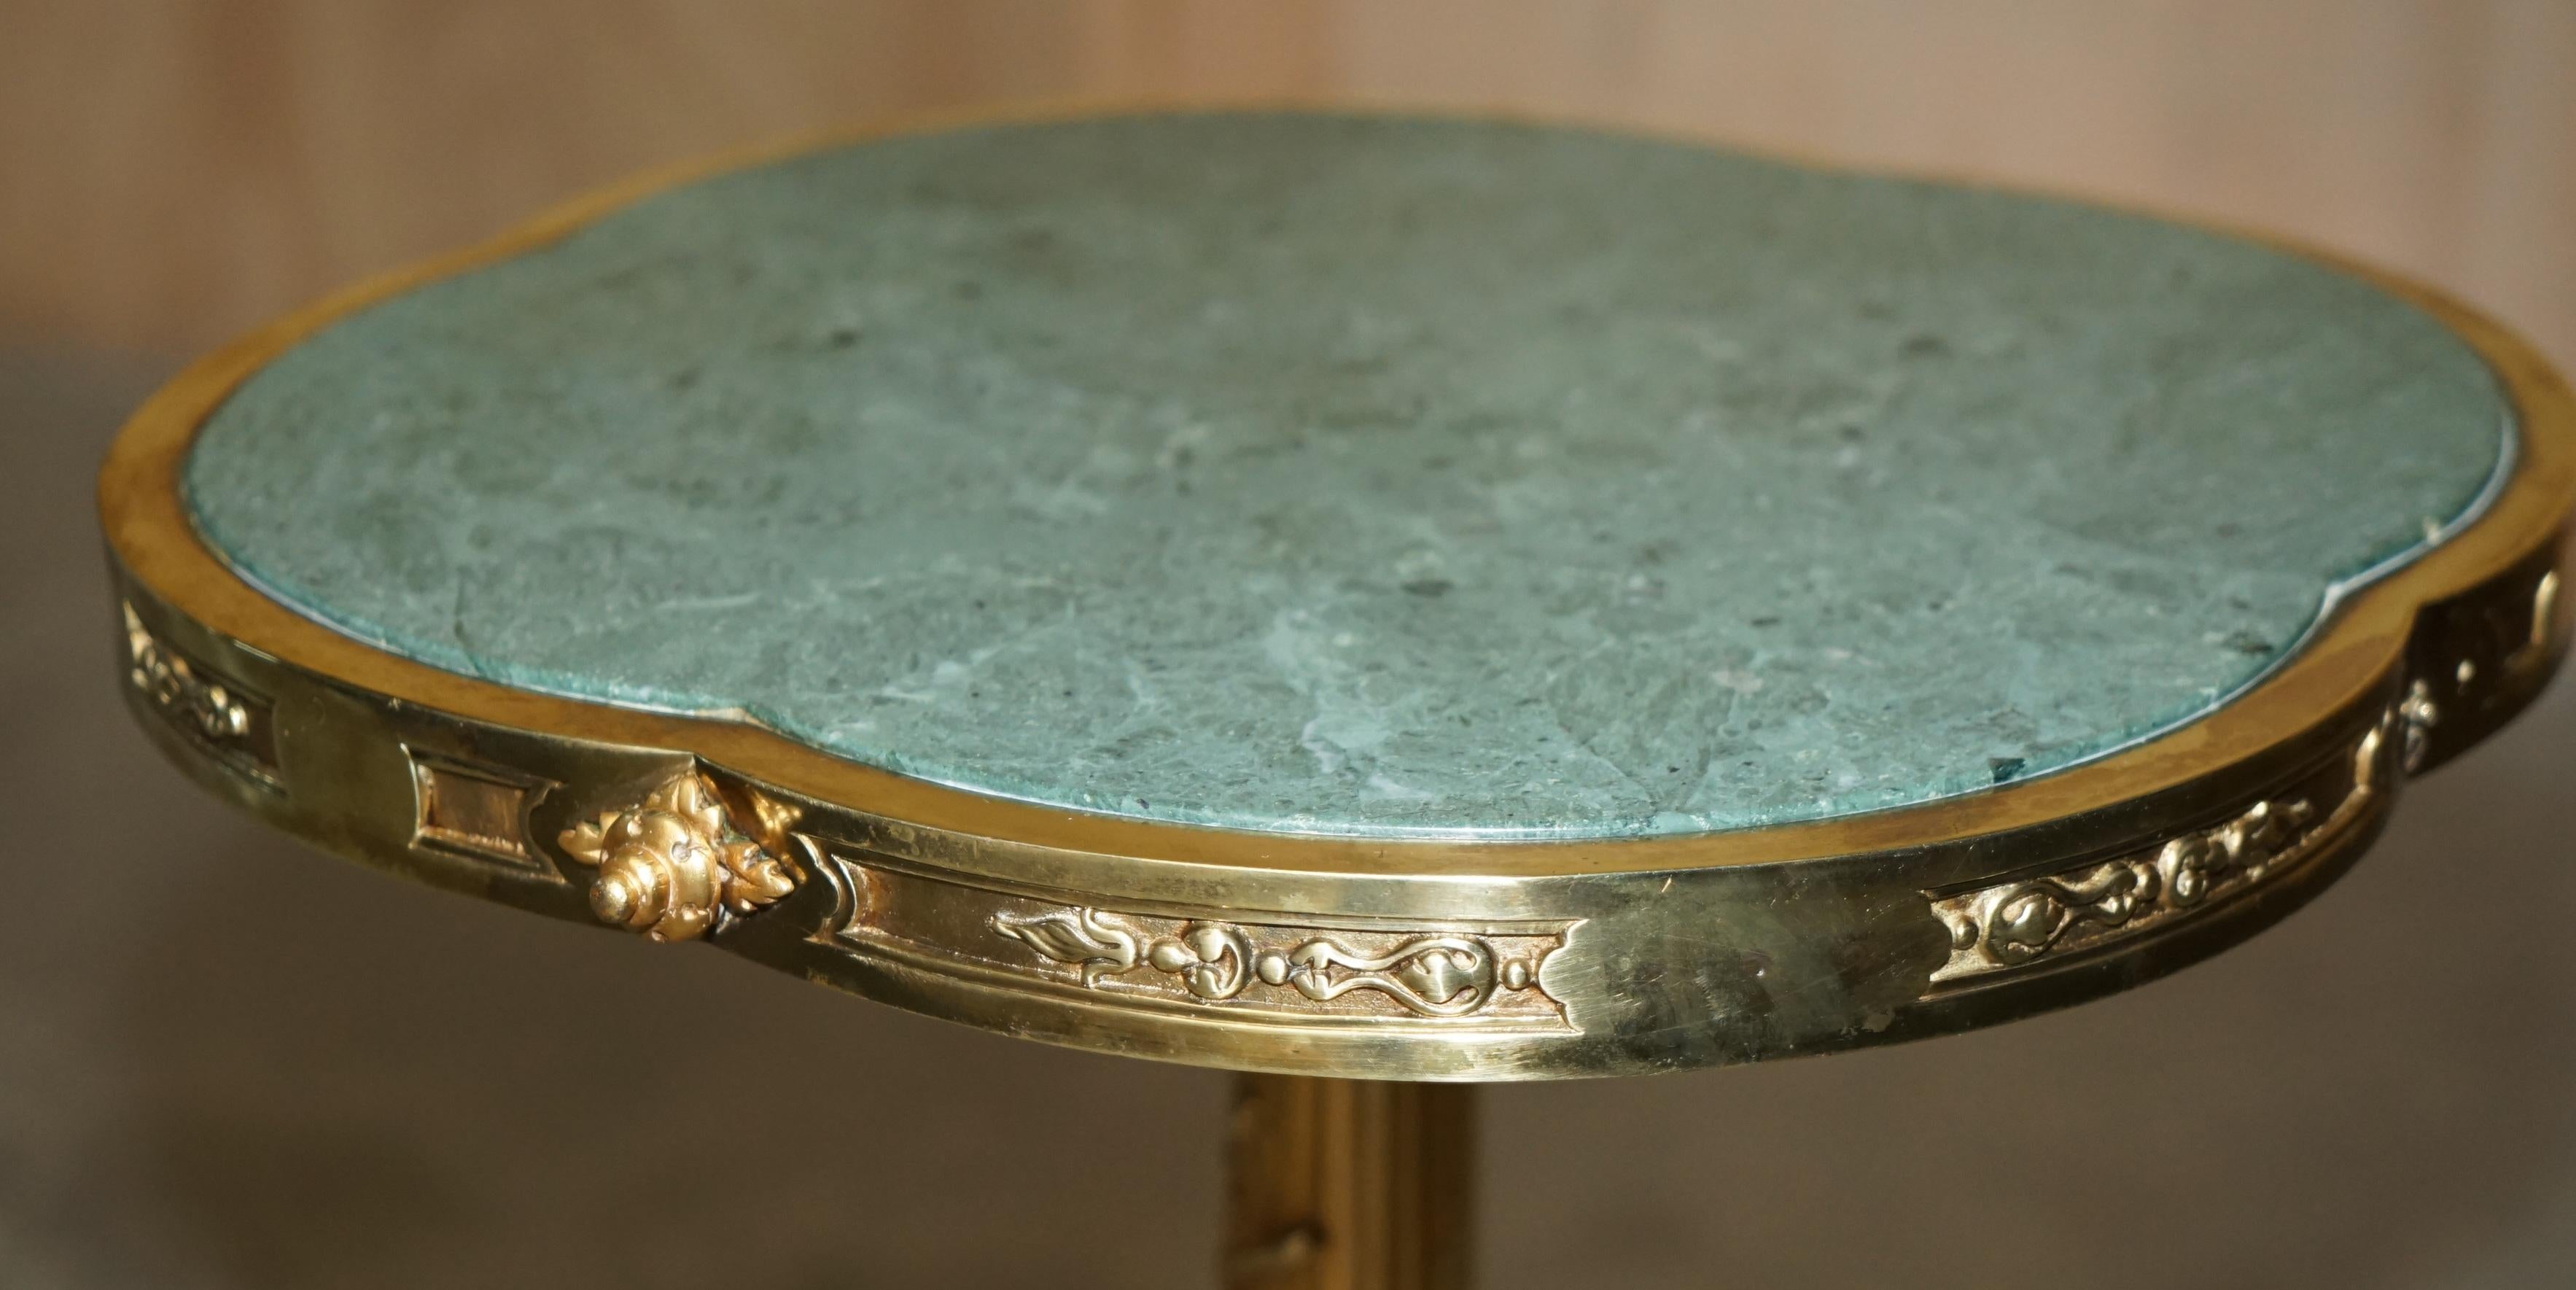 EXQUISITE ANTIQUE CIRCA 1900 BRASS SiDE END LAMP TABLE WITH THICK MARBLE TOP For Sale 10